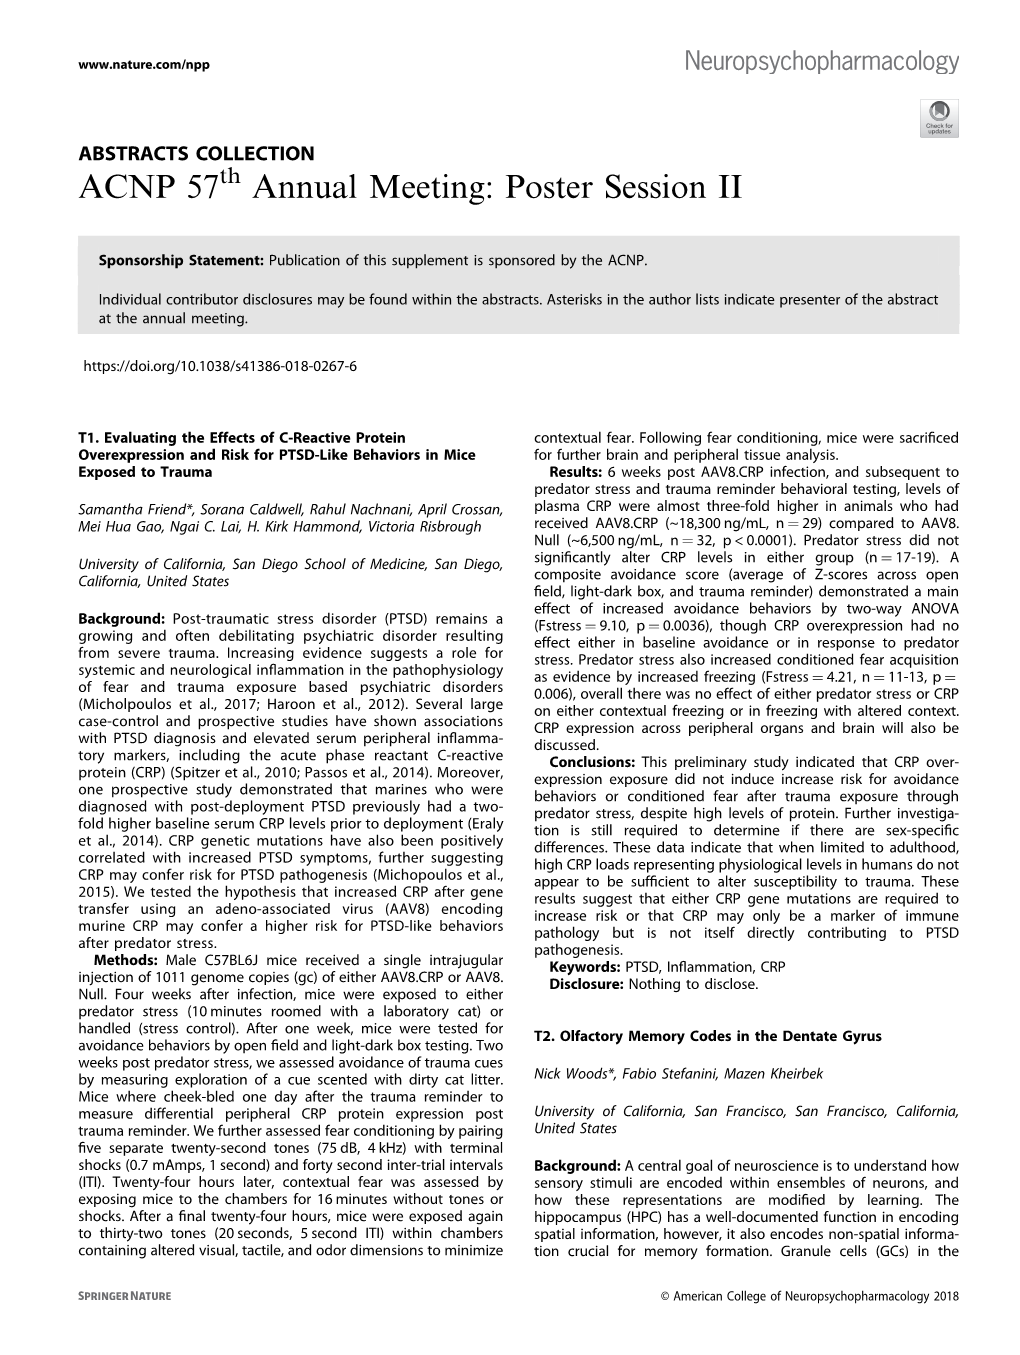 ACNP 57Th Annual Meeting: Poster Session II